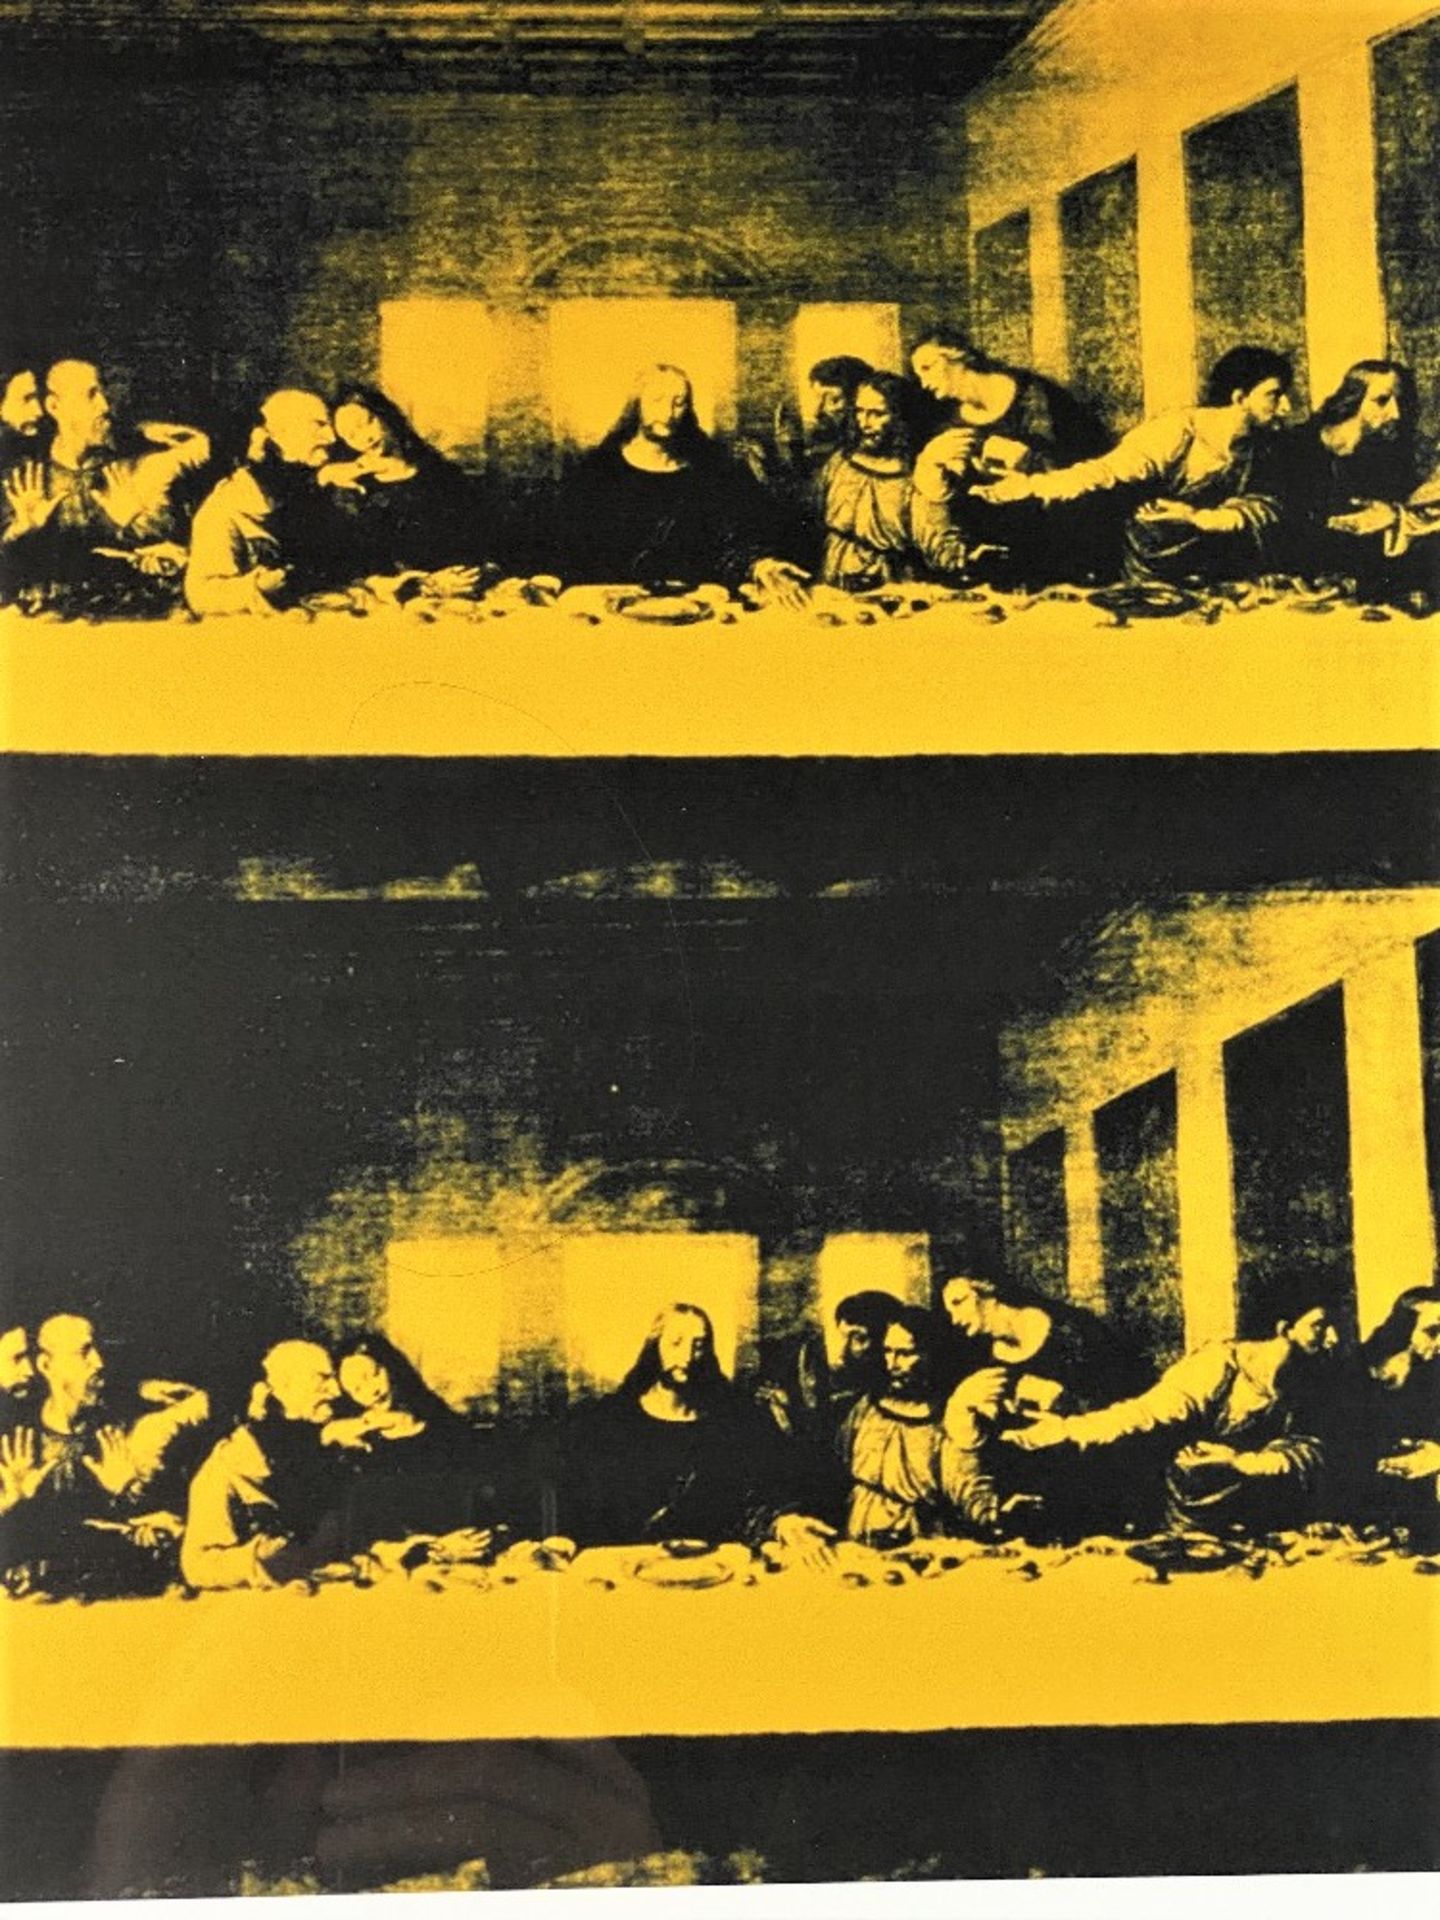 Andy Warhol-(1928-1987) "Last Supper" Numbered Lithograph - Image 2 of 7